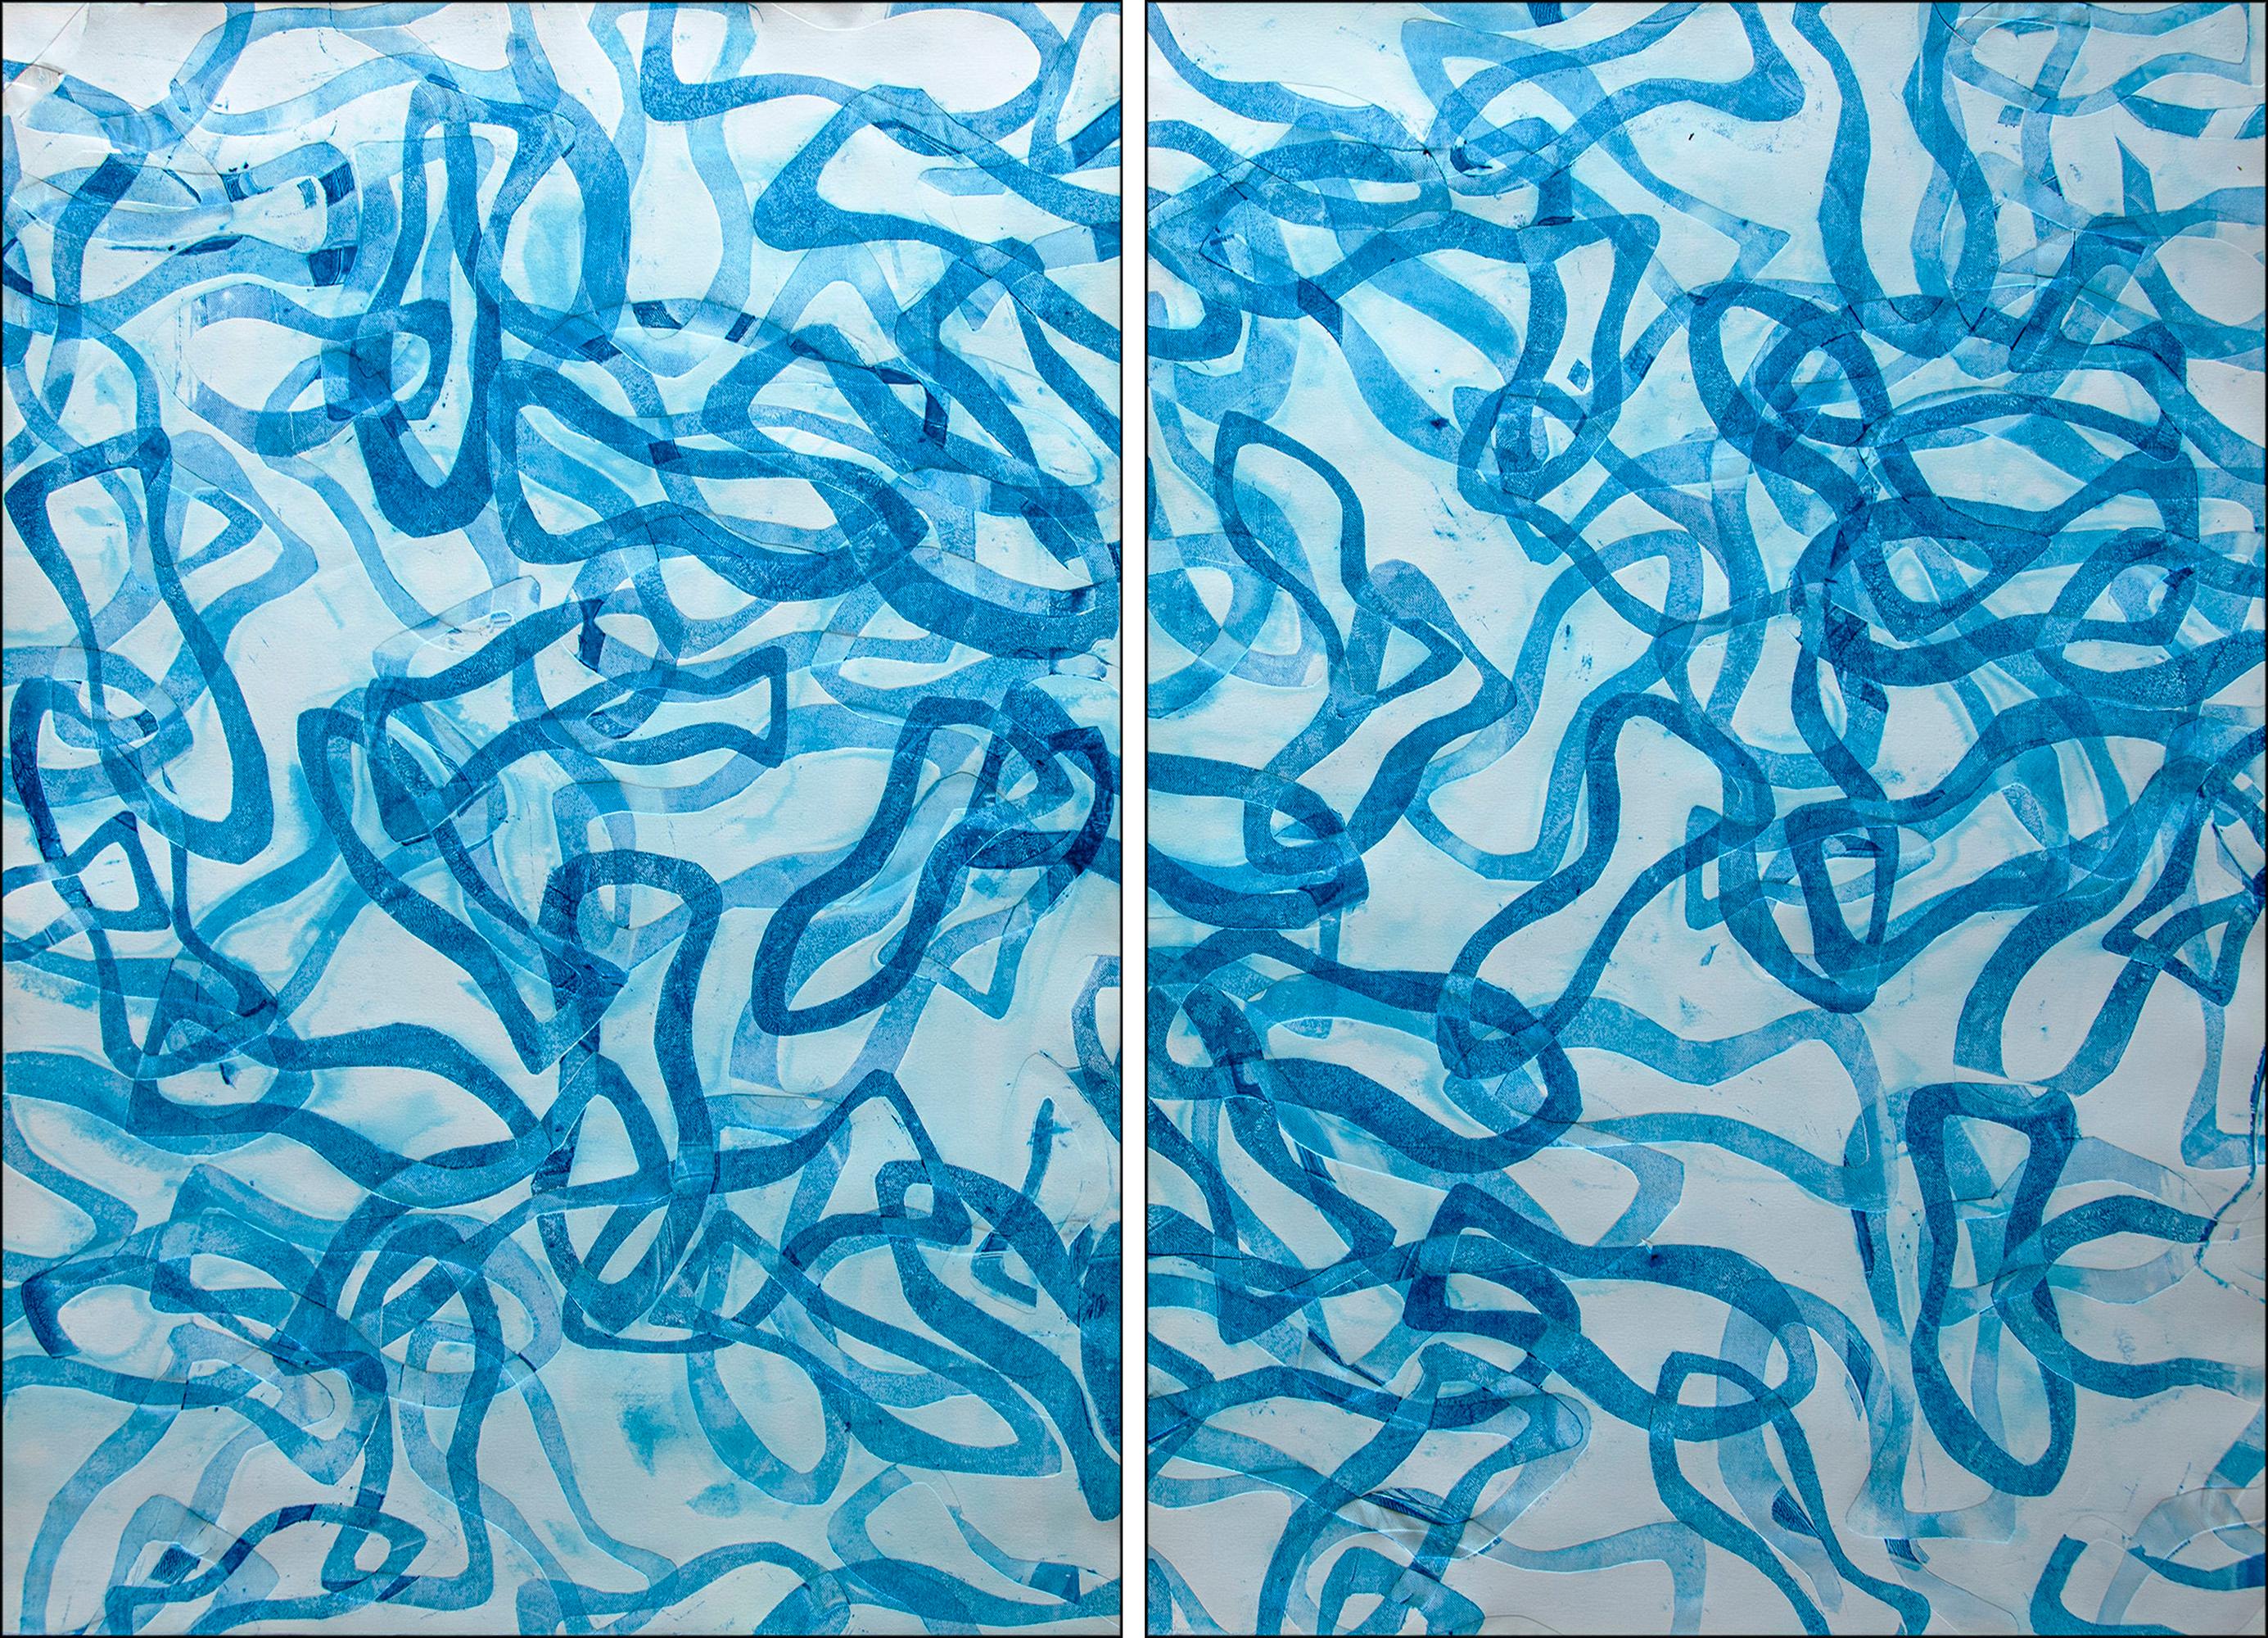 Enric Servera Animal Painting - Blue of Blues, Abstract Fish Shapes Diptych, Overlapping Forms, Mediterranean